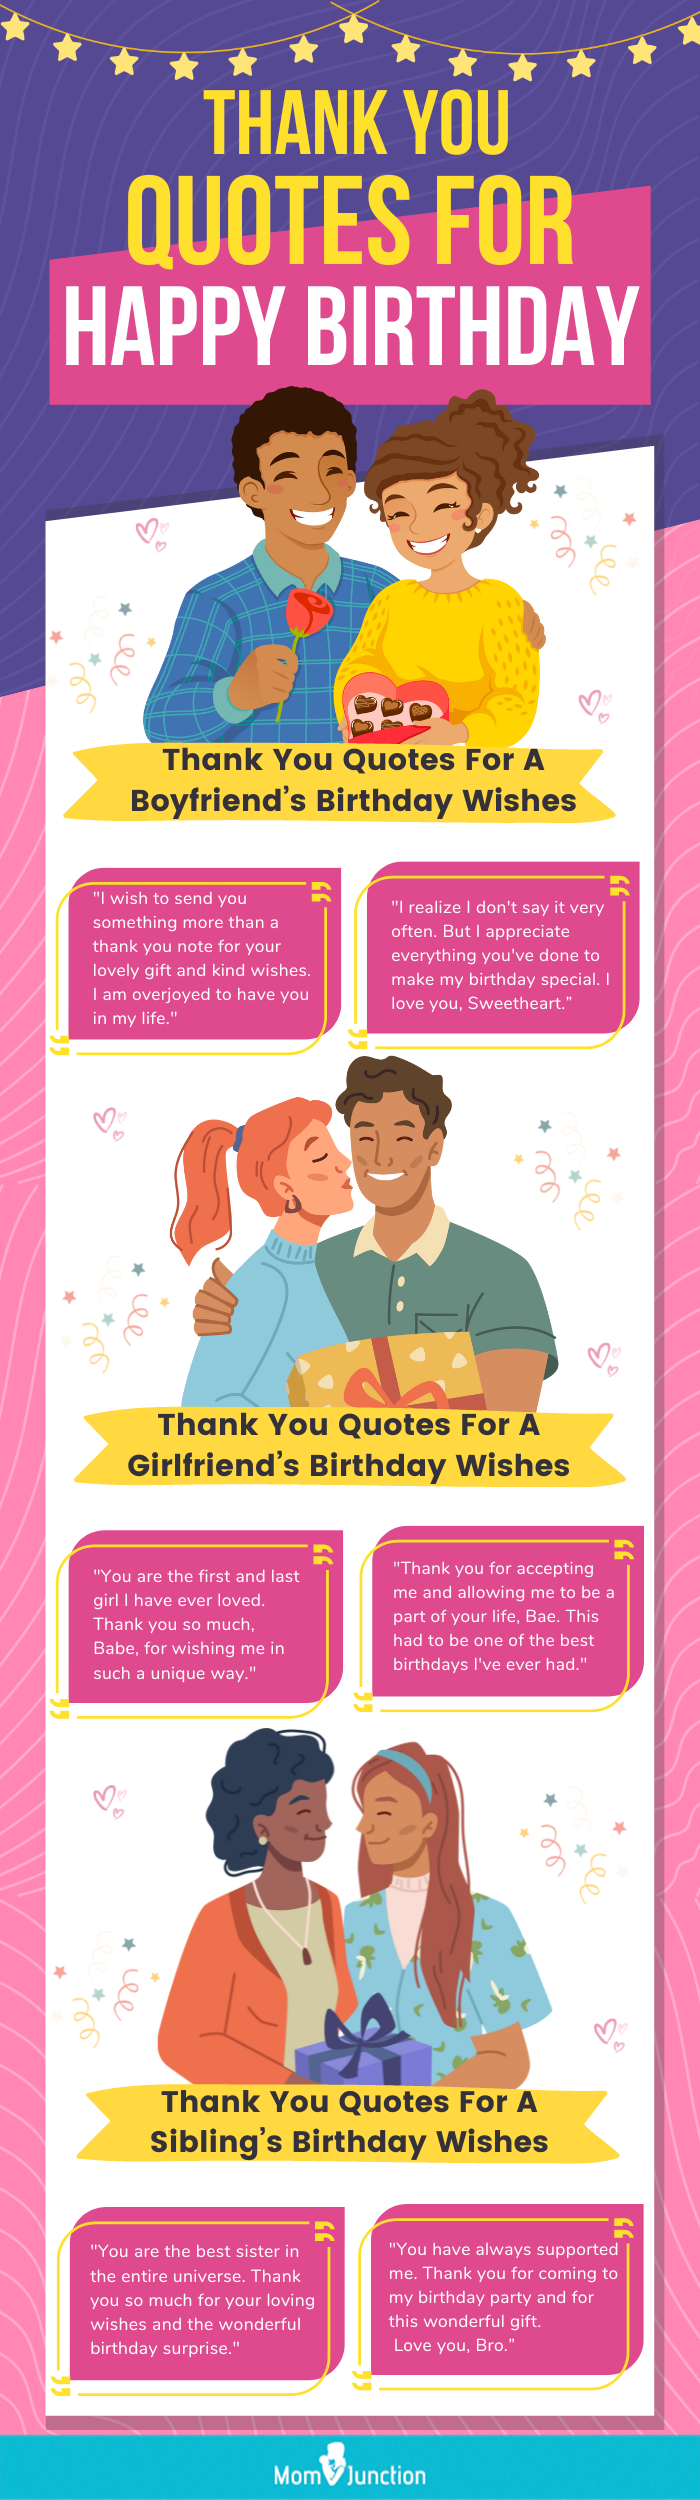 Heartfelt Thank You Quotes for Birthday Wishes